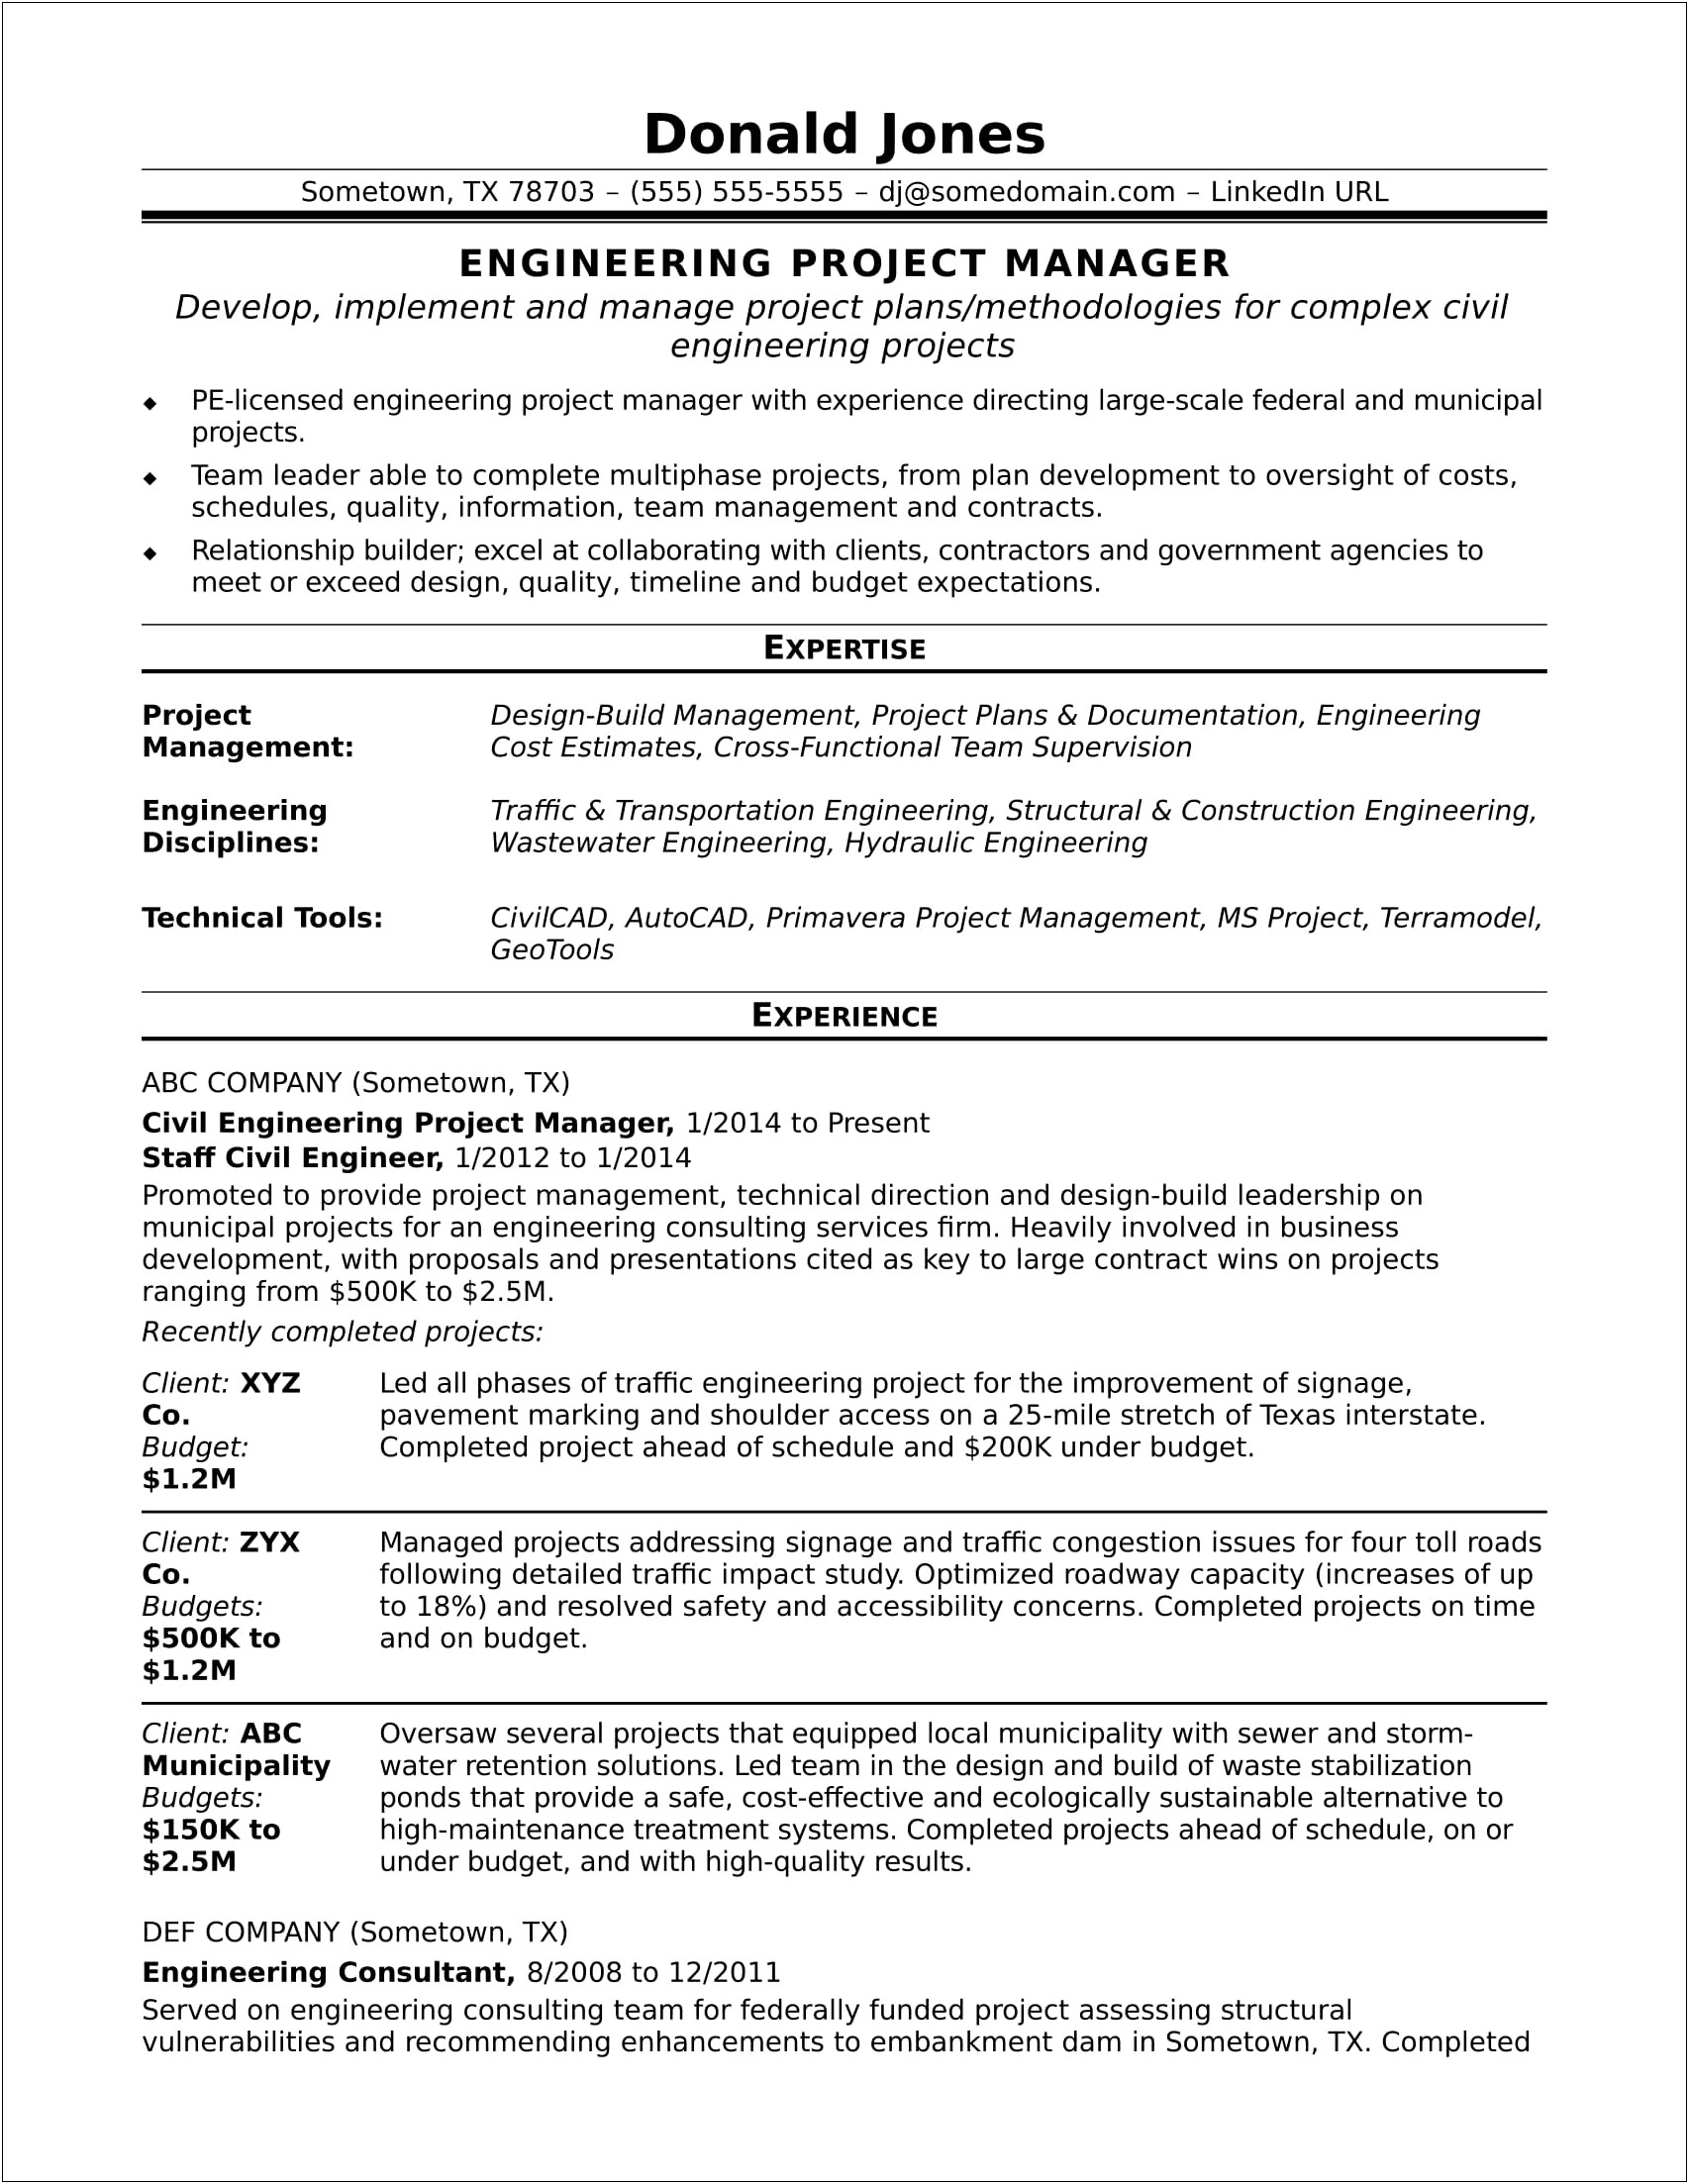 Project Manager Resume Keywords 2012